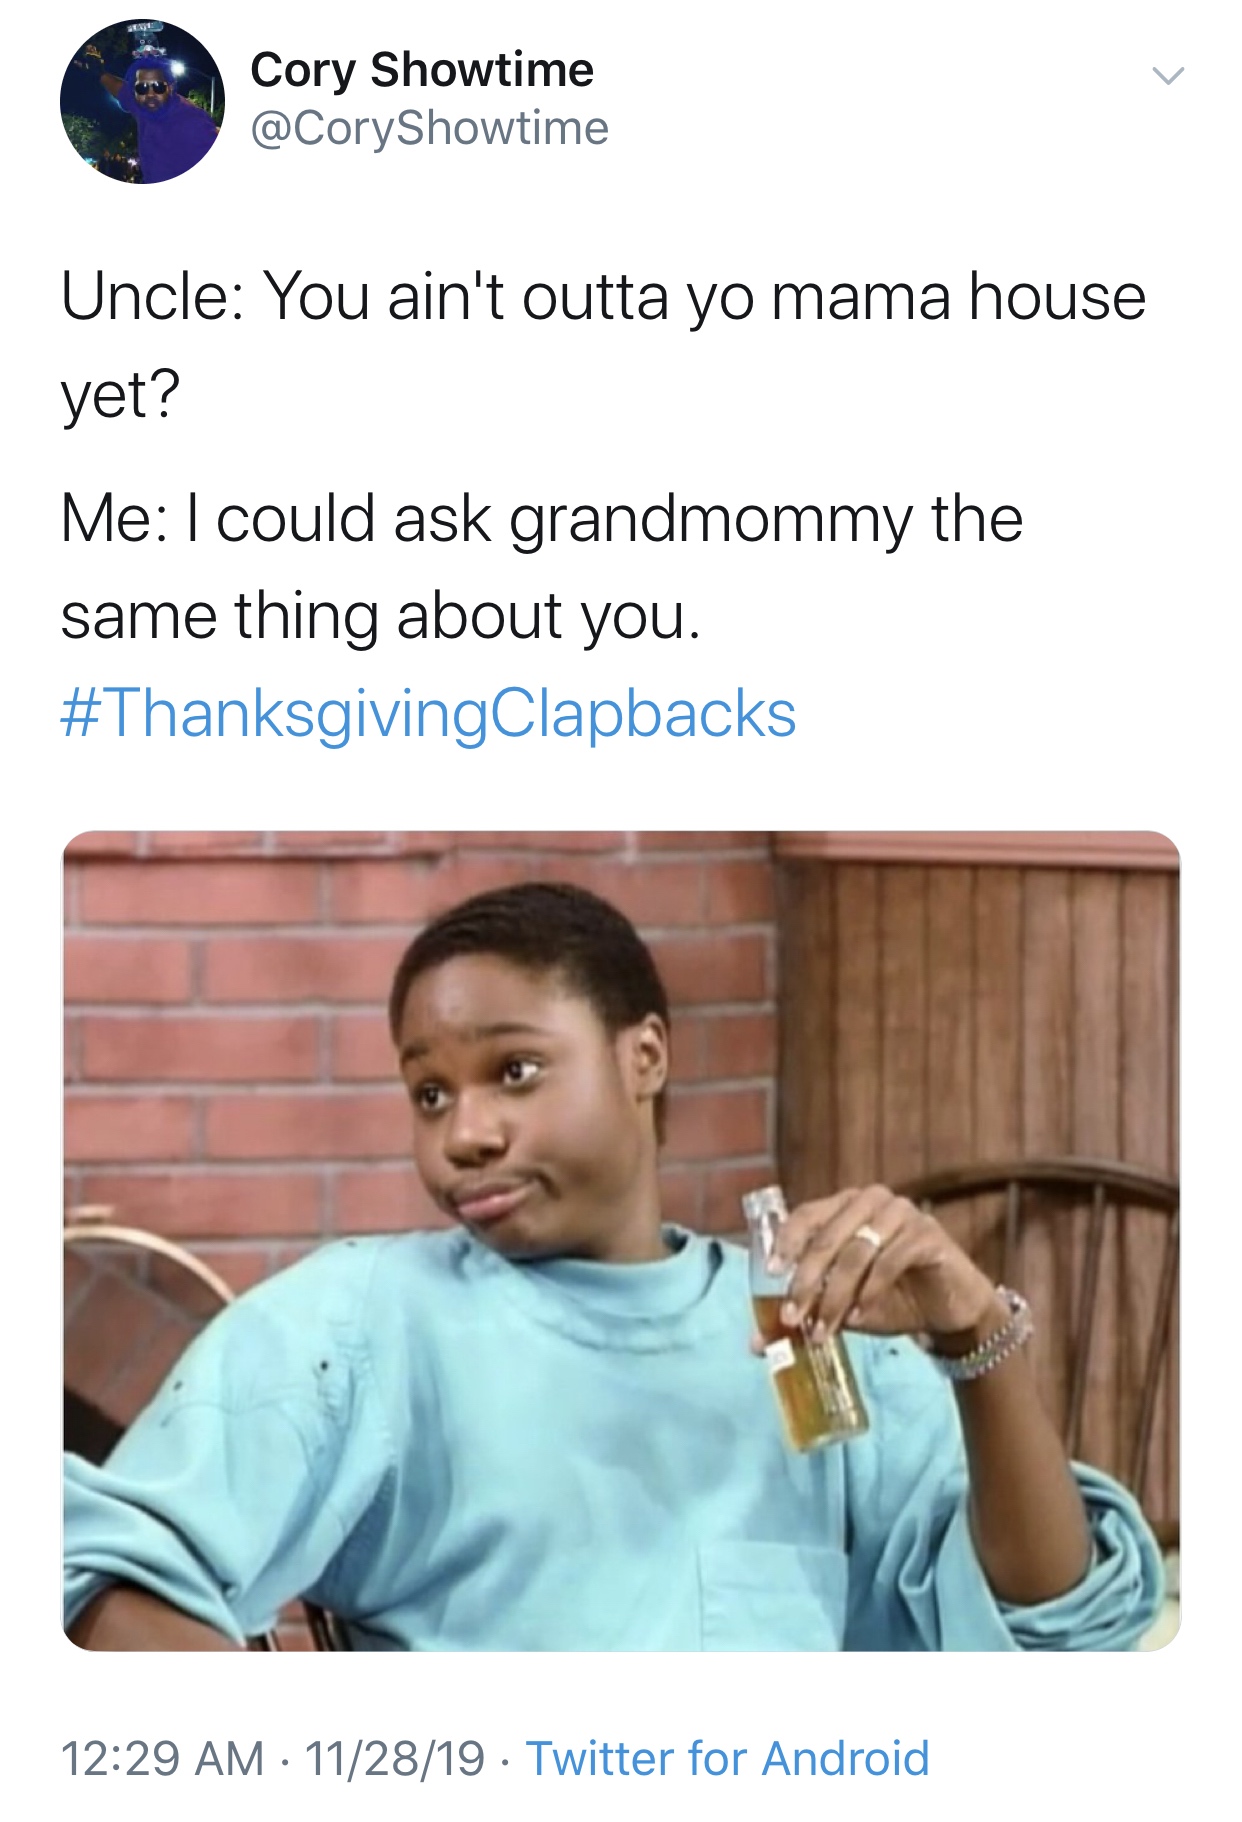 real quotes memes - Cory Showtime Uncle You ain't outta yo mama house yet? Me I could ask grandmommy the same thing about you. 112819 Twitter for Android